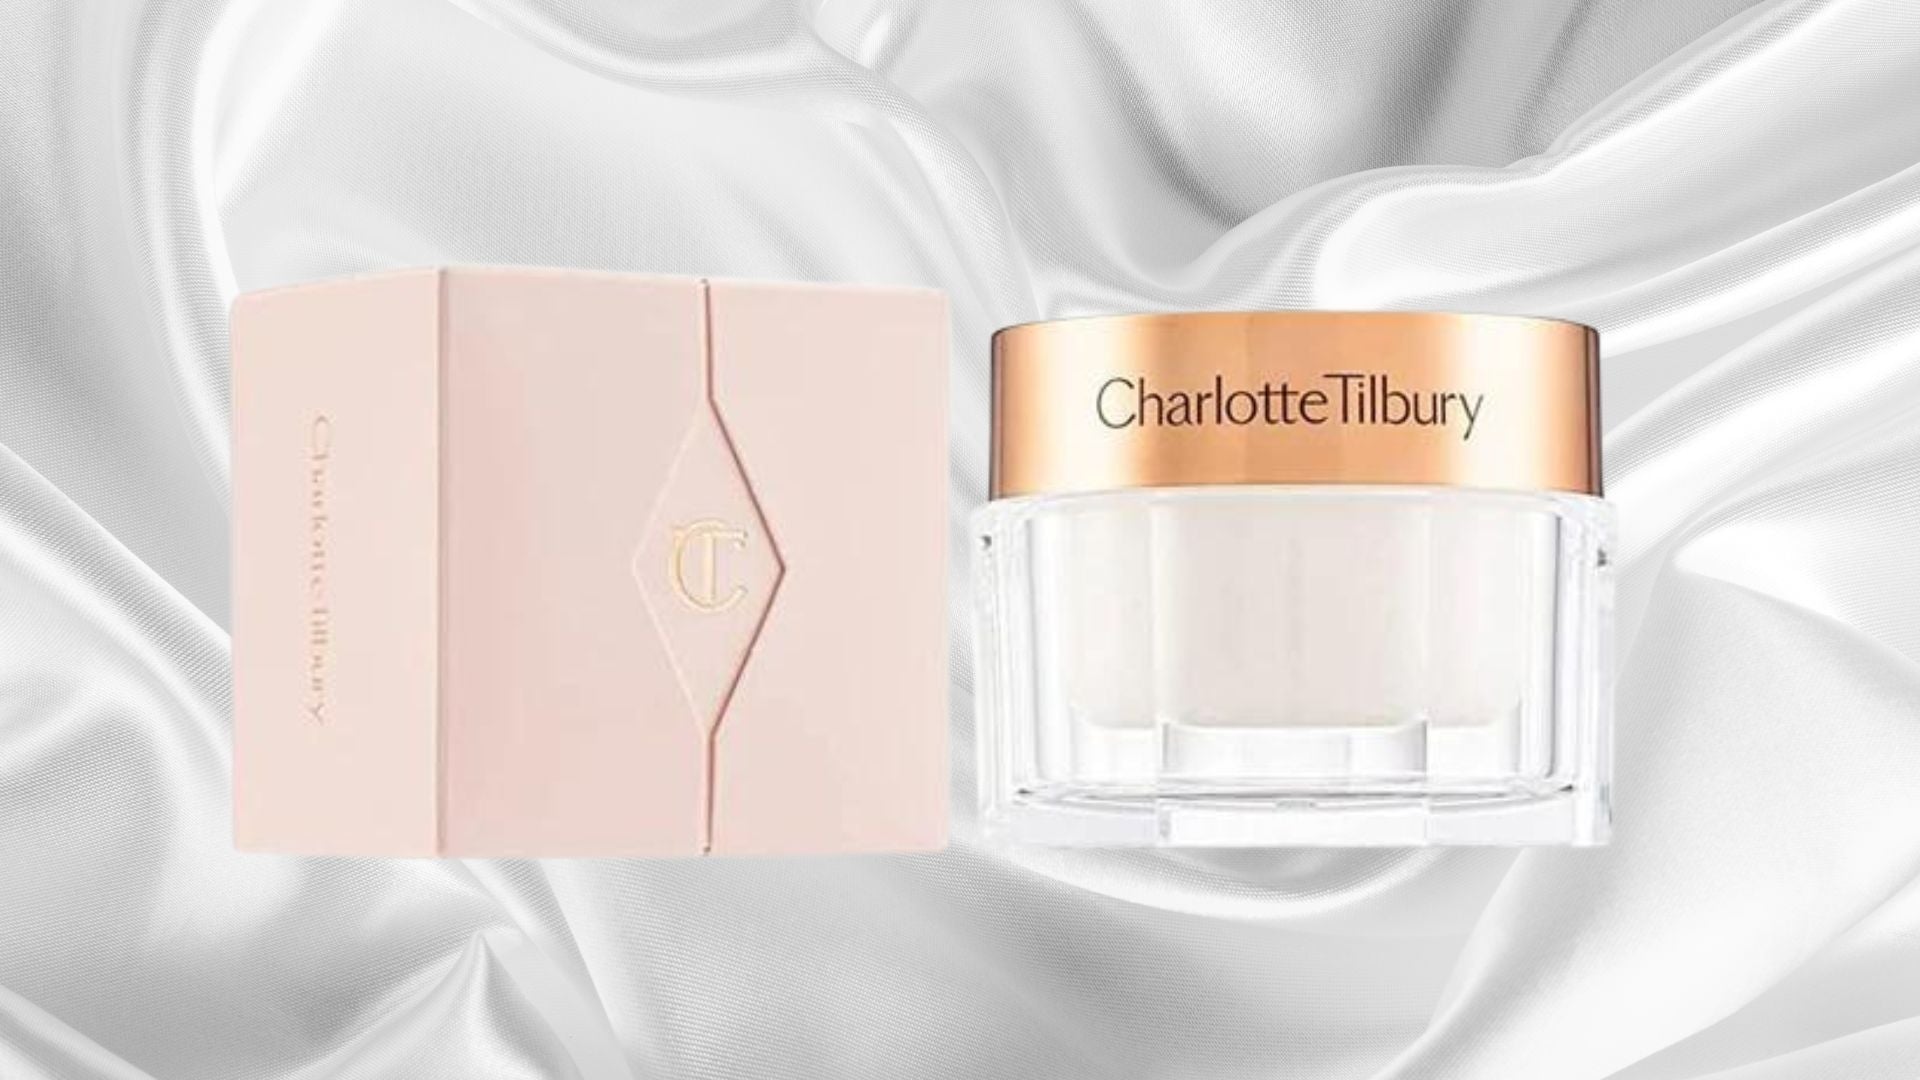 Don't Waste Your Money on Charlotte Tilbury Skincare Until You Read This